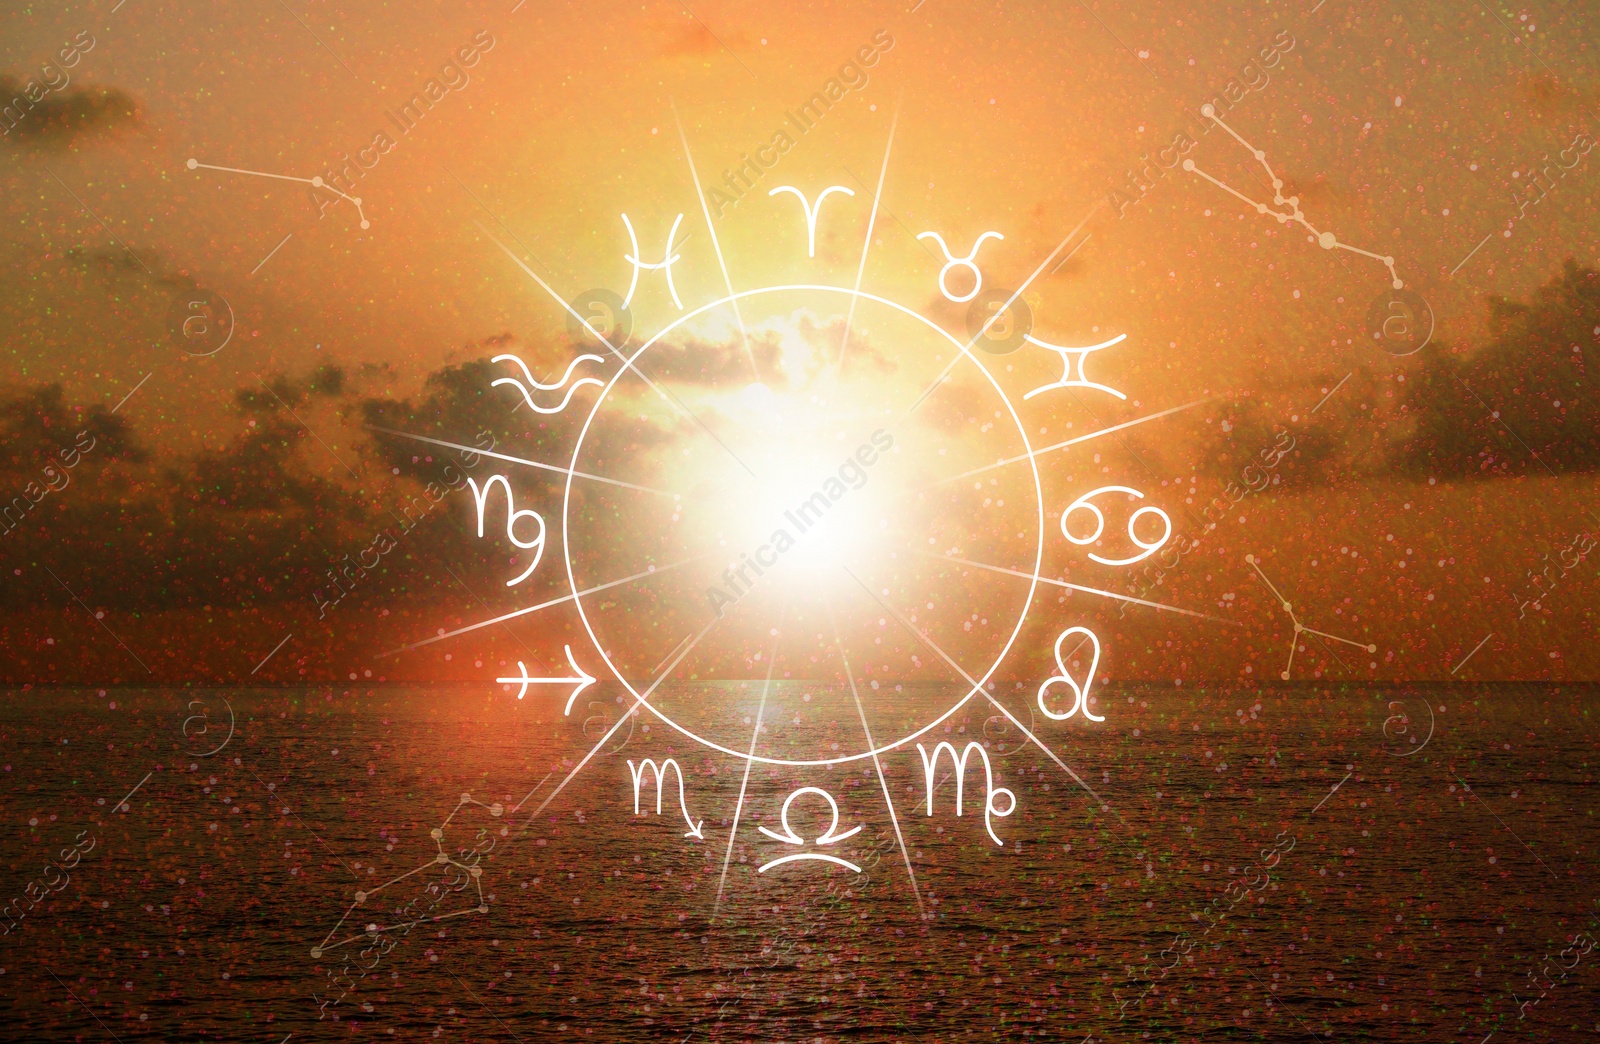 Image of Zodiac wheel with 12 astrological signs and seascape on background